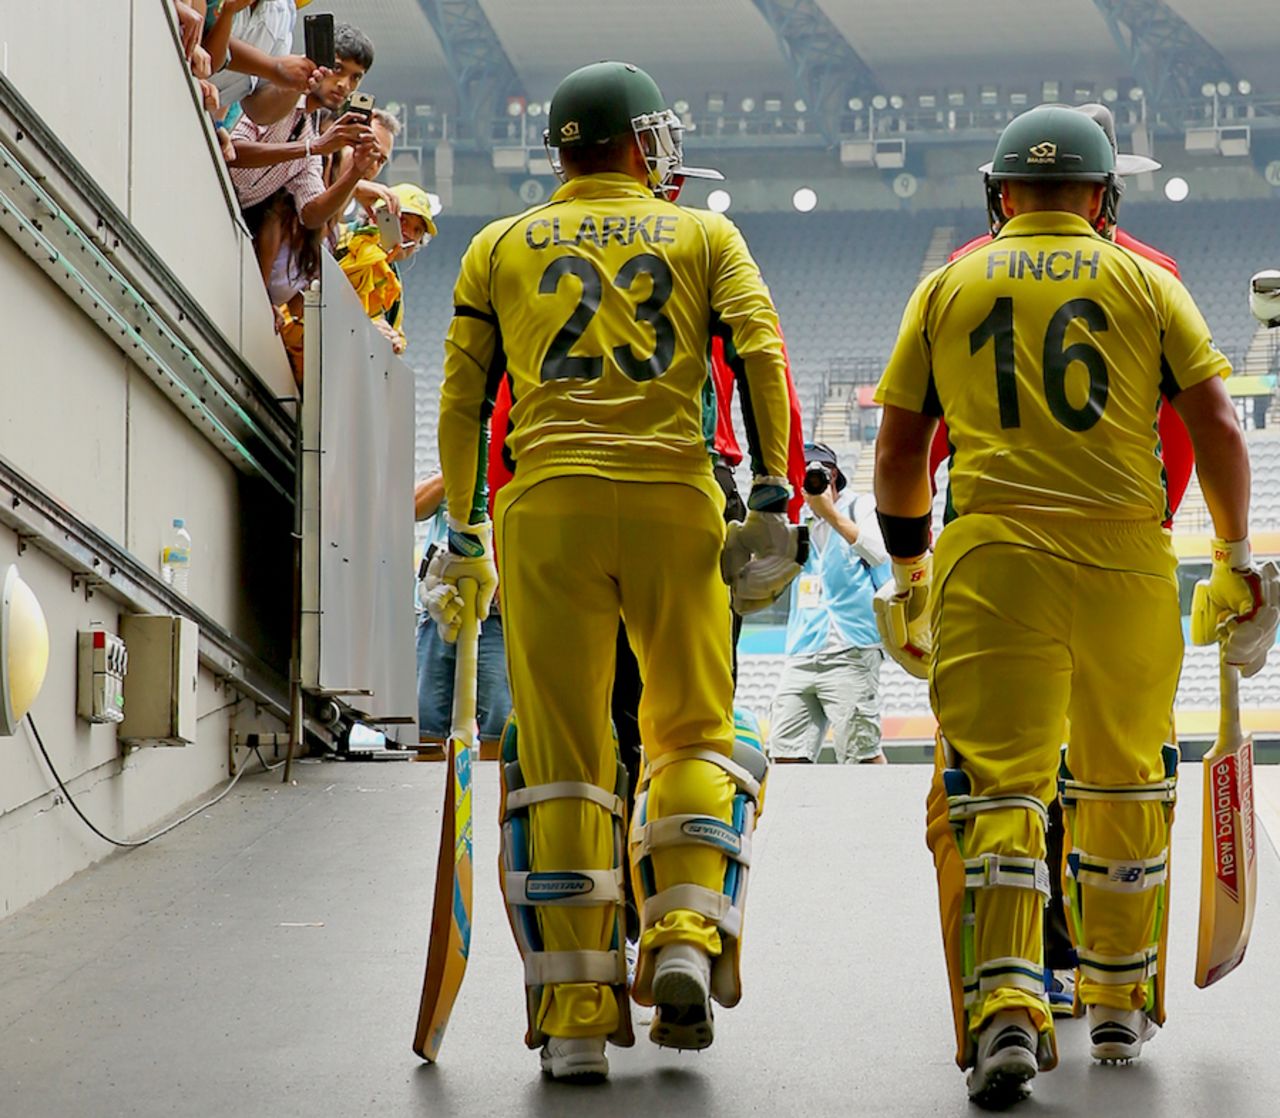 Michael Clarke walks out to open the innings with Aaron Finch, Australia v UAE, World Cup warm-up, Melbourne, February 11, 2015